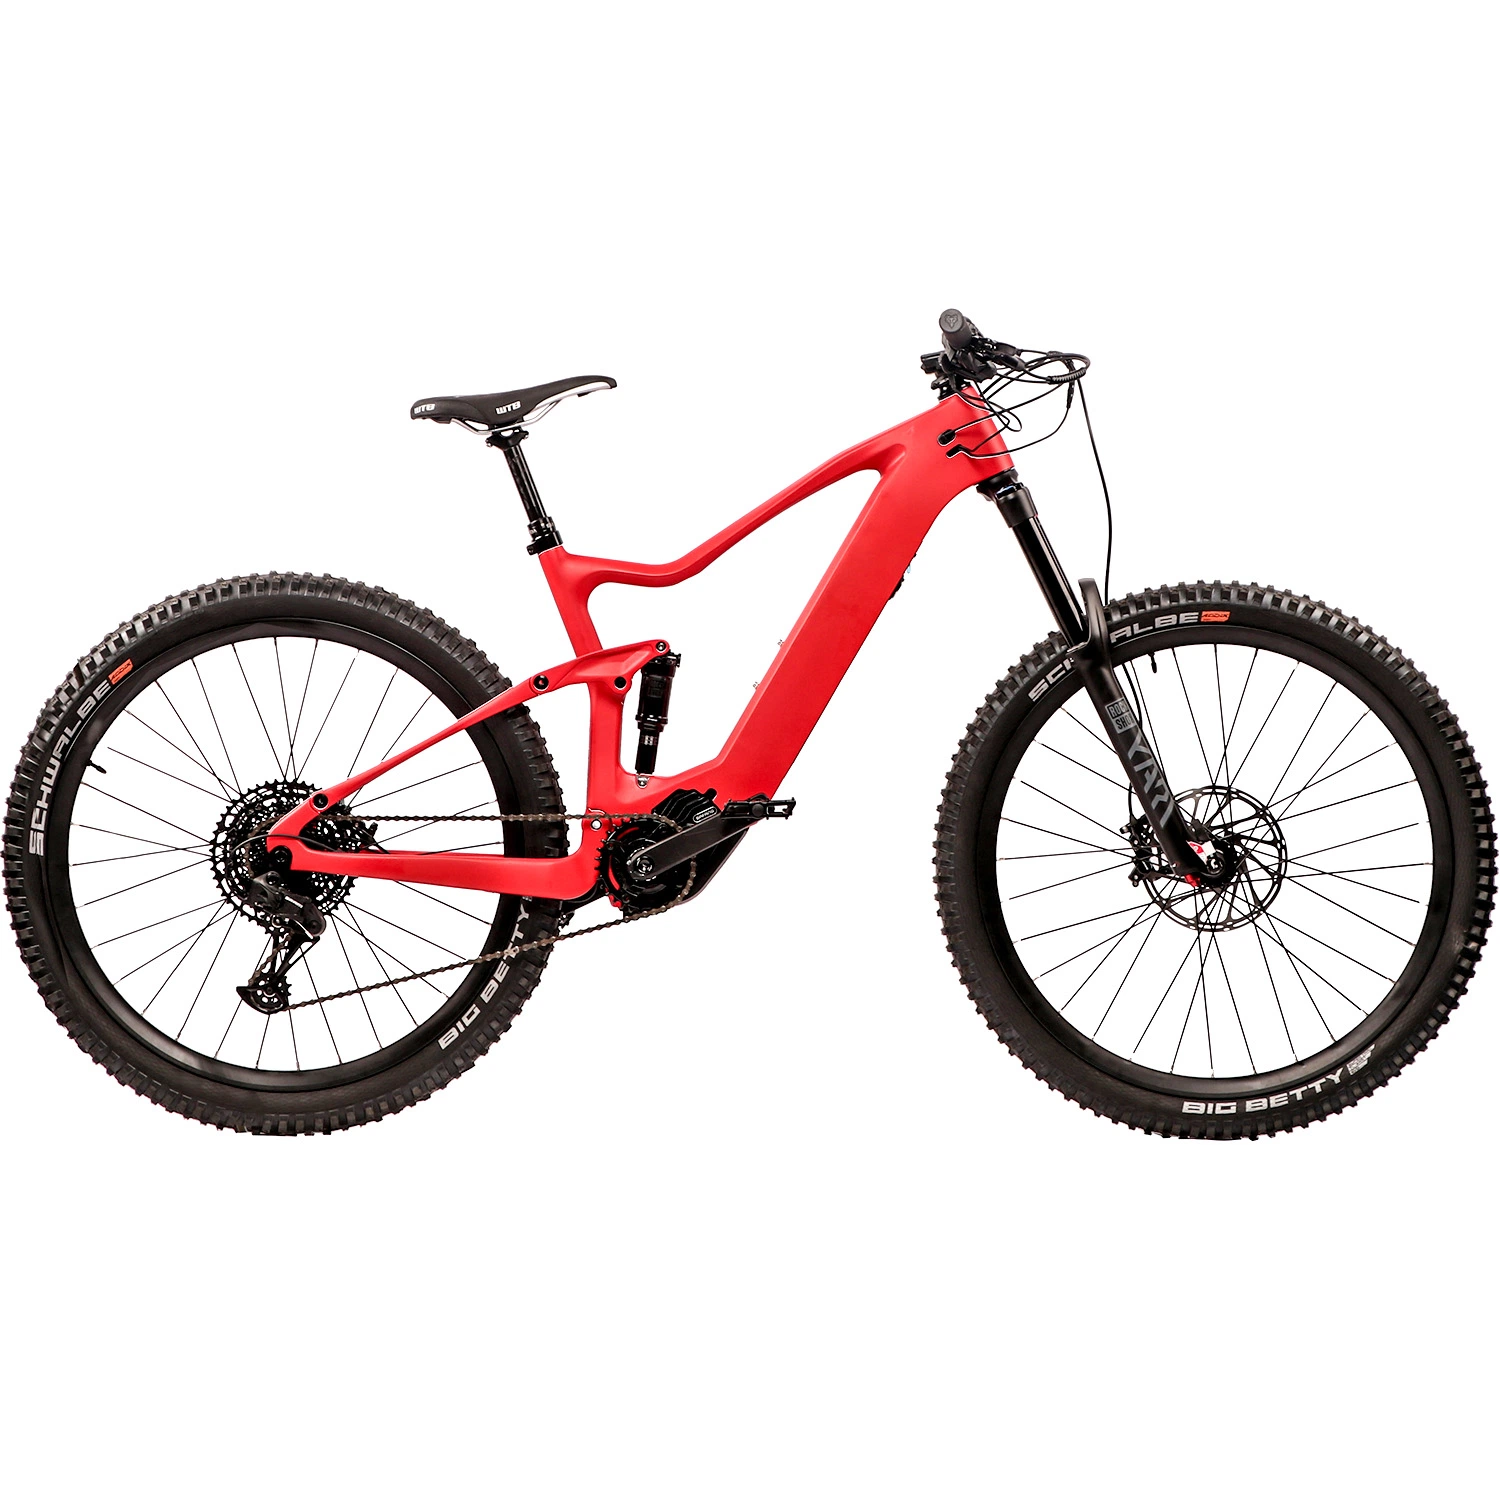 Full Suspension Carbon Fiber Frame Electric Mountain Bicycle with Bafang M600 Motor